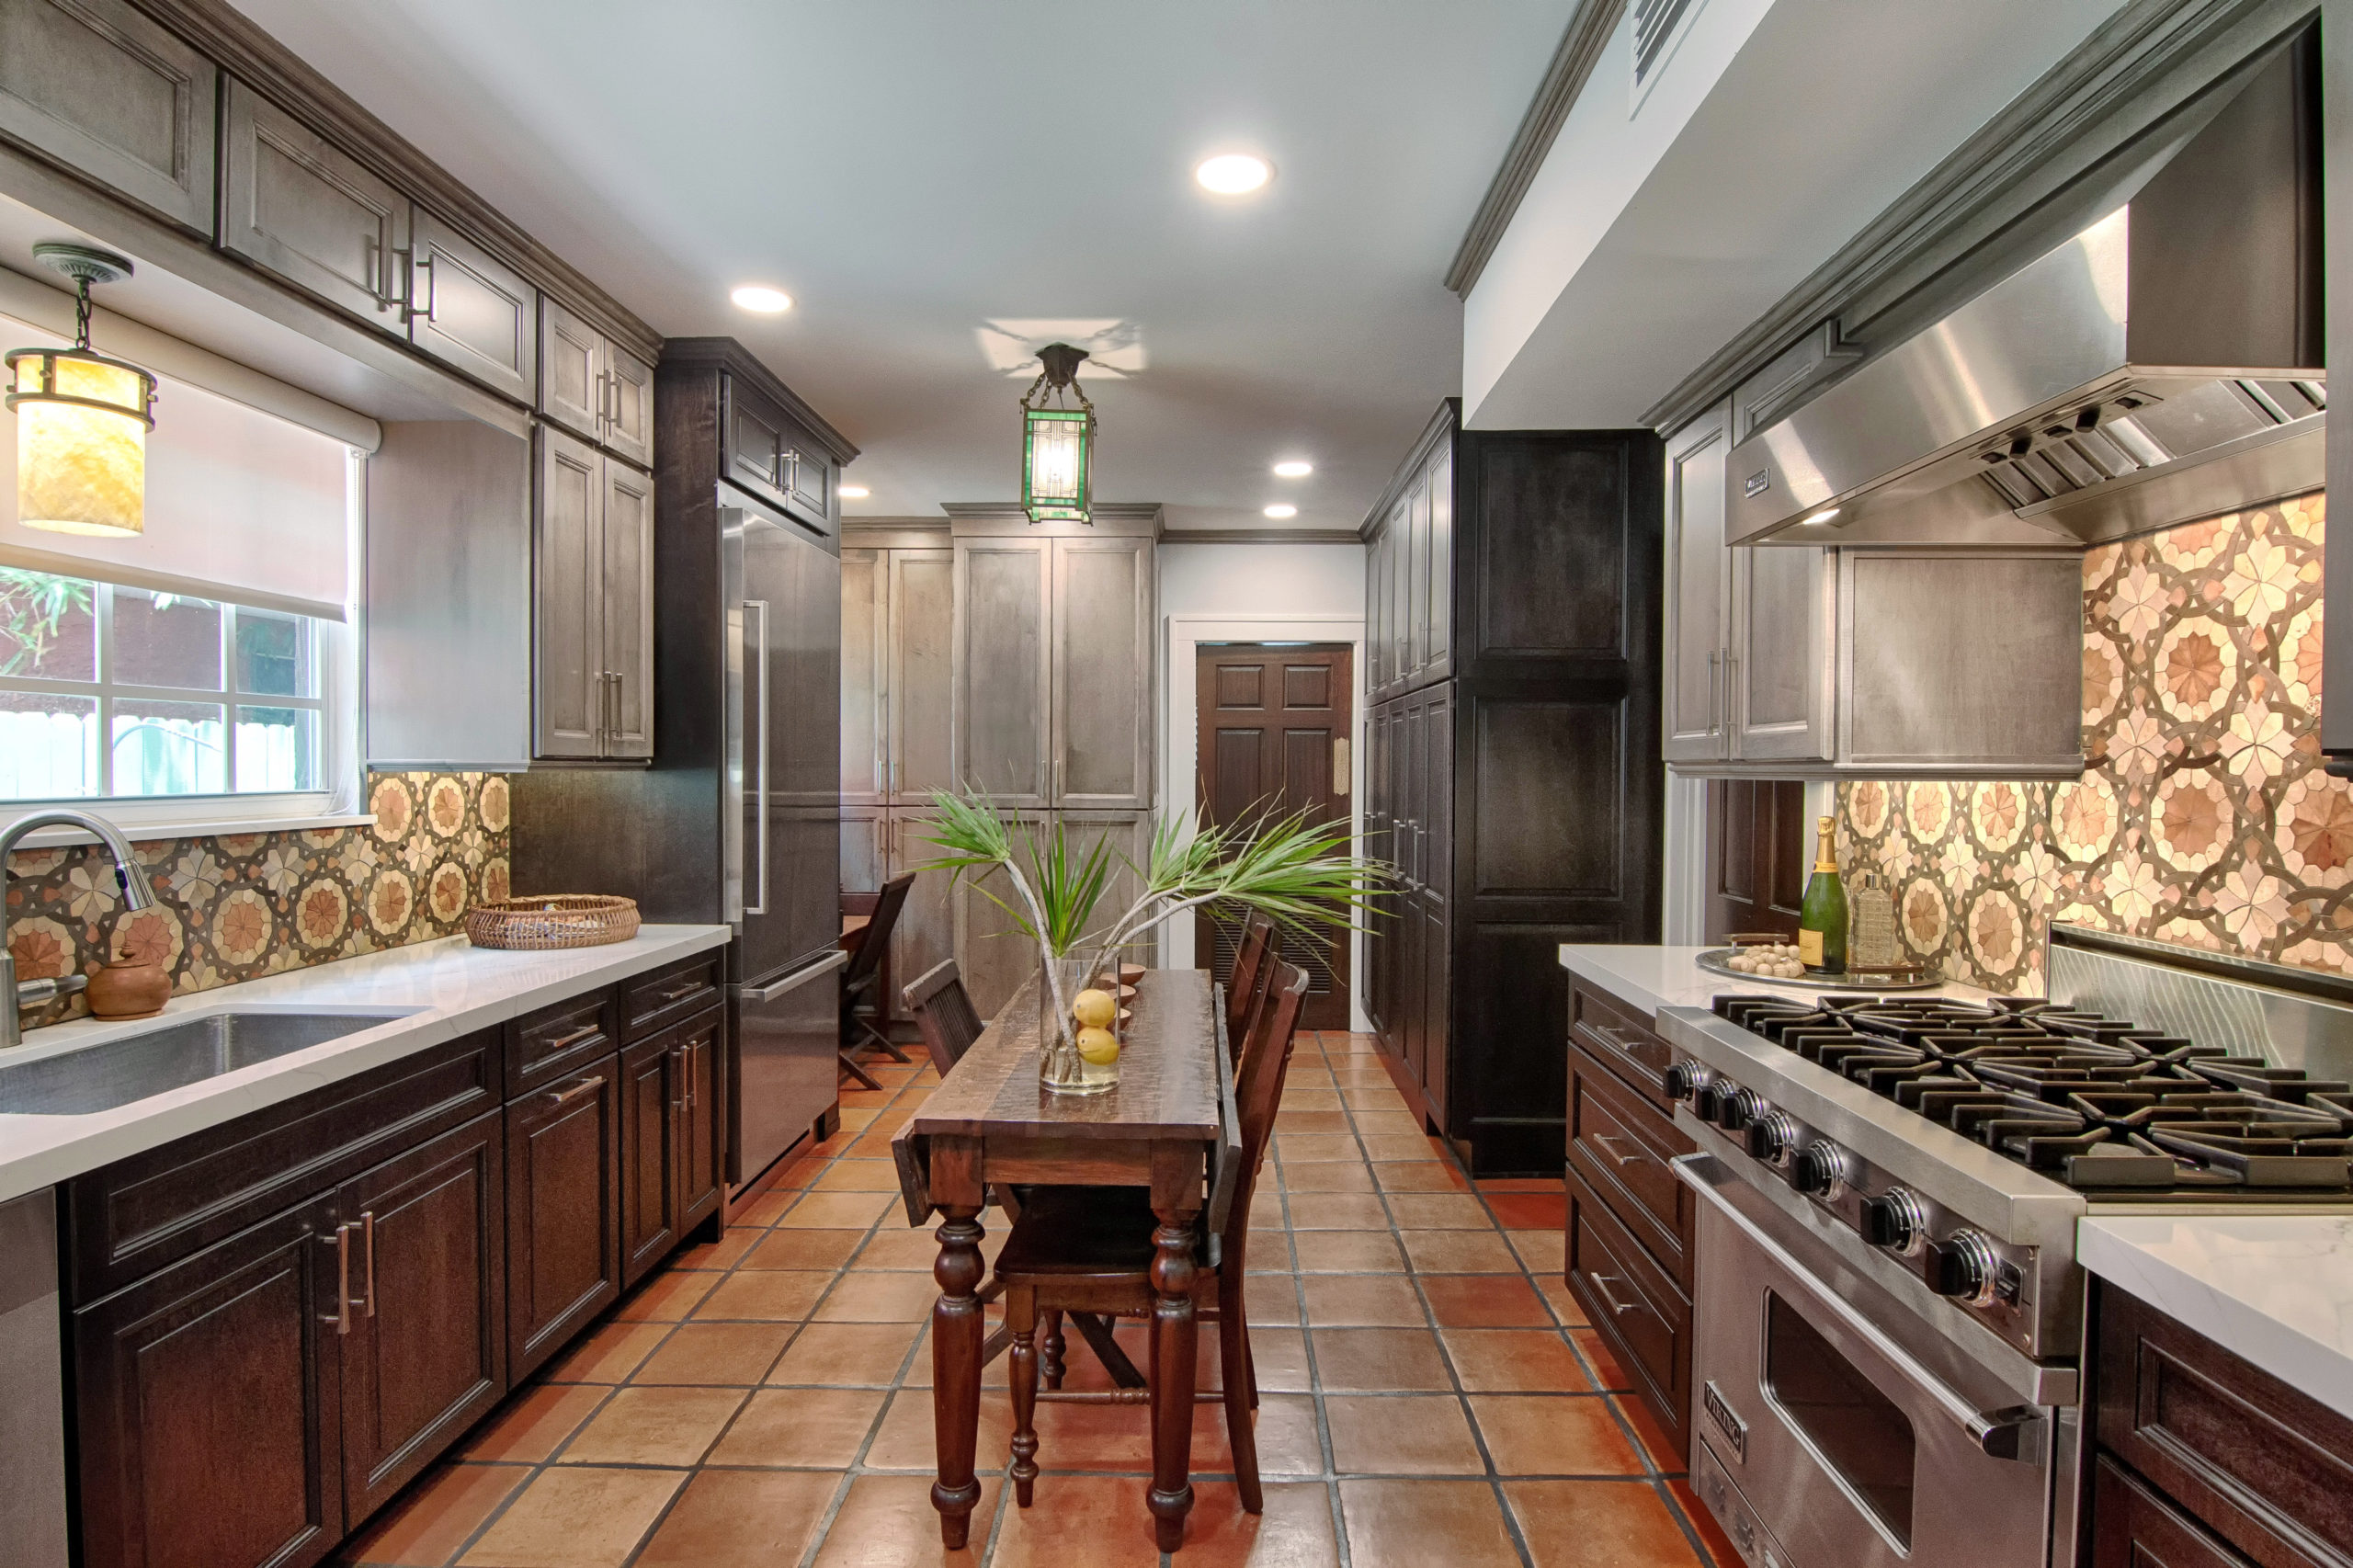 Historic Kitchen Remodel located in Northwood Village